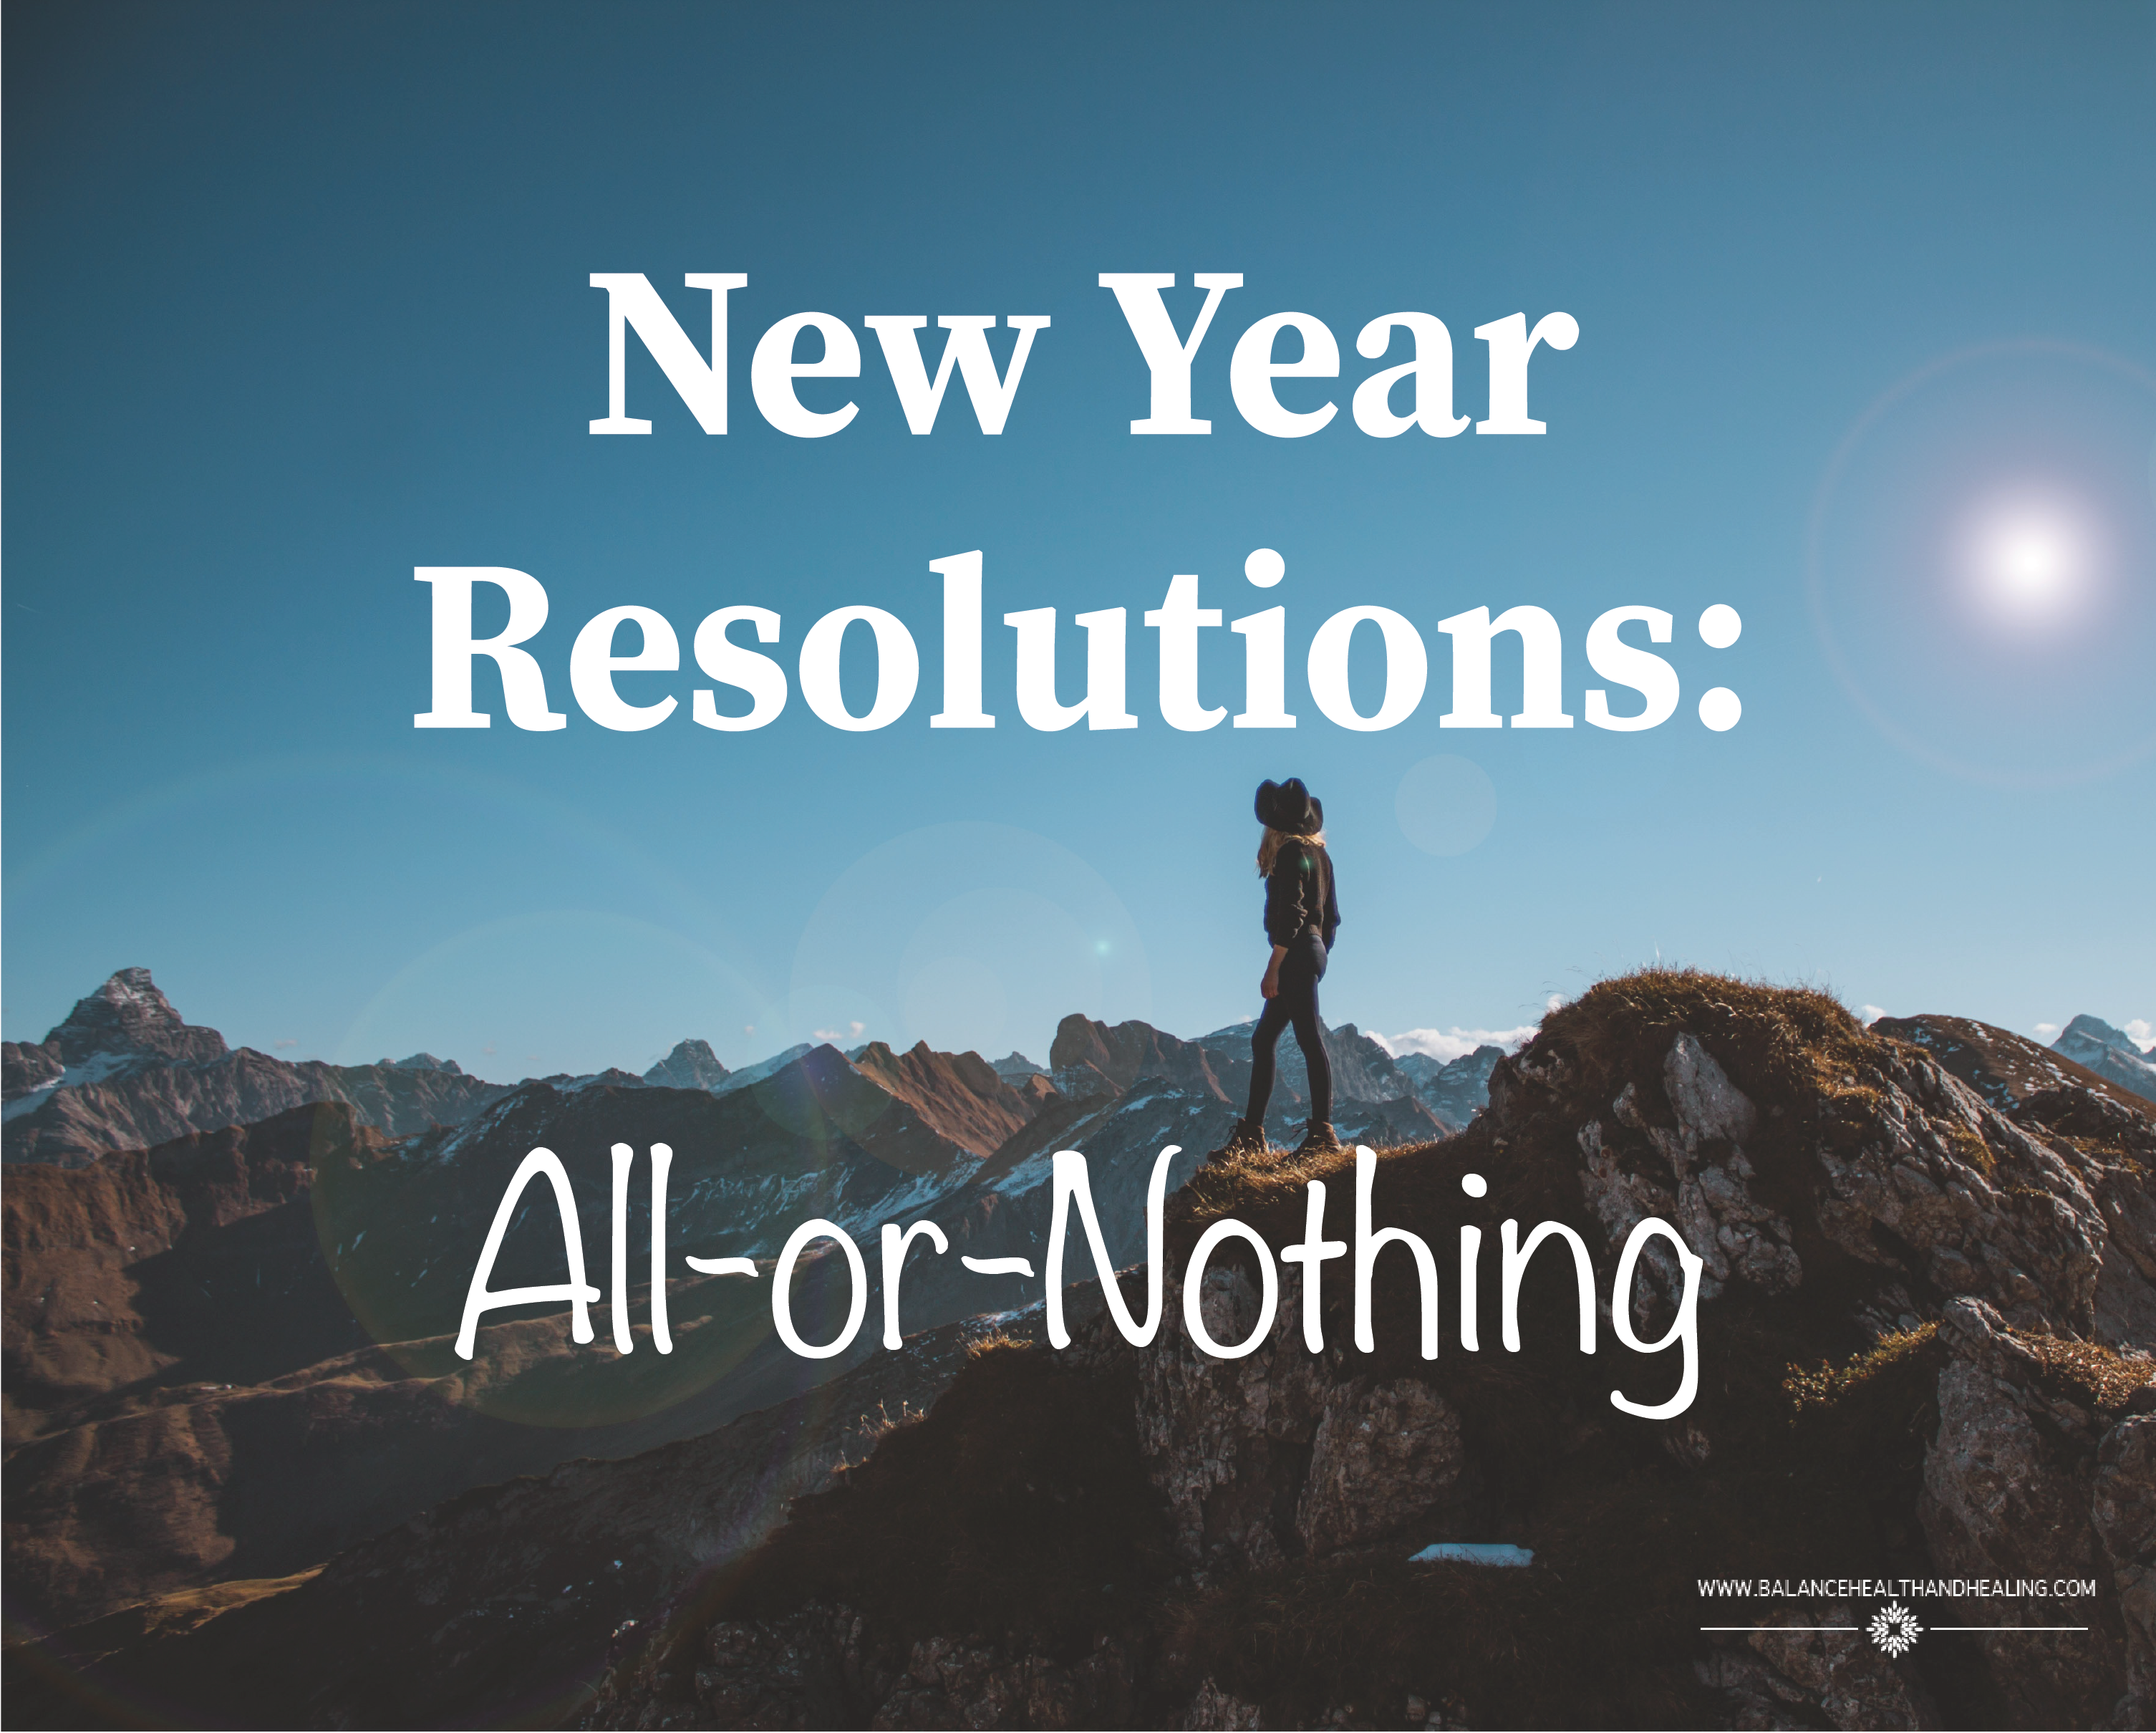 New Year Resolutions: All-or-Nothing